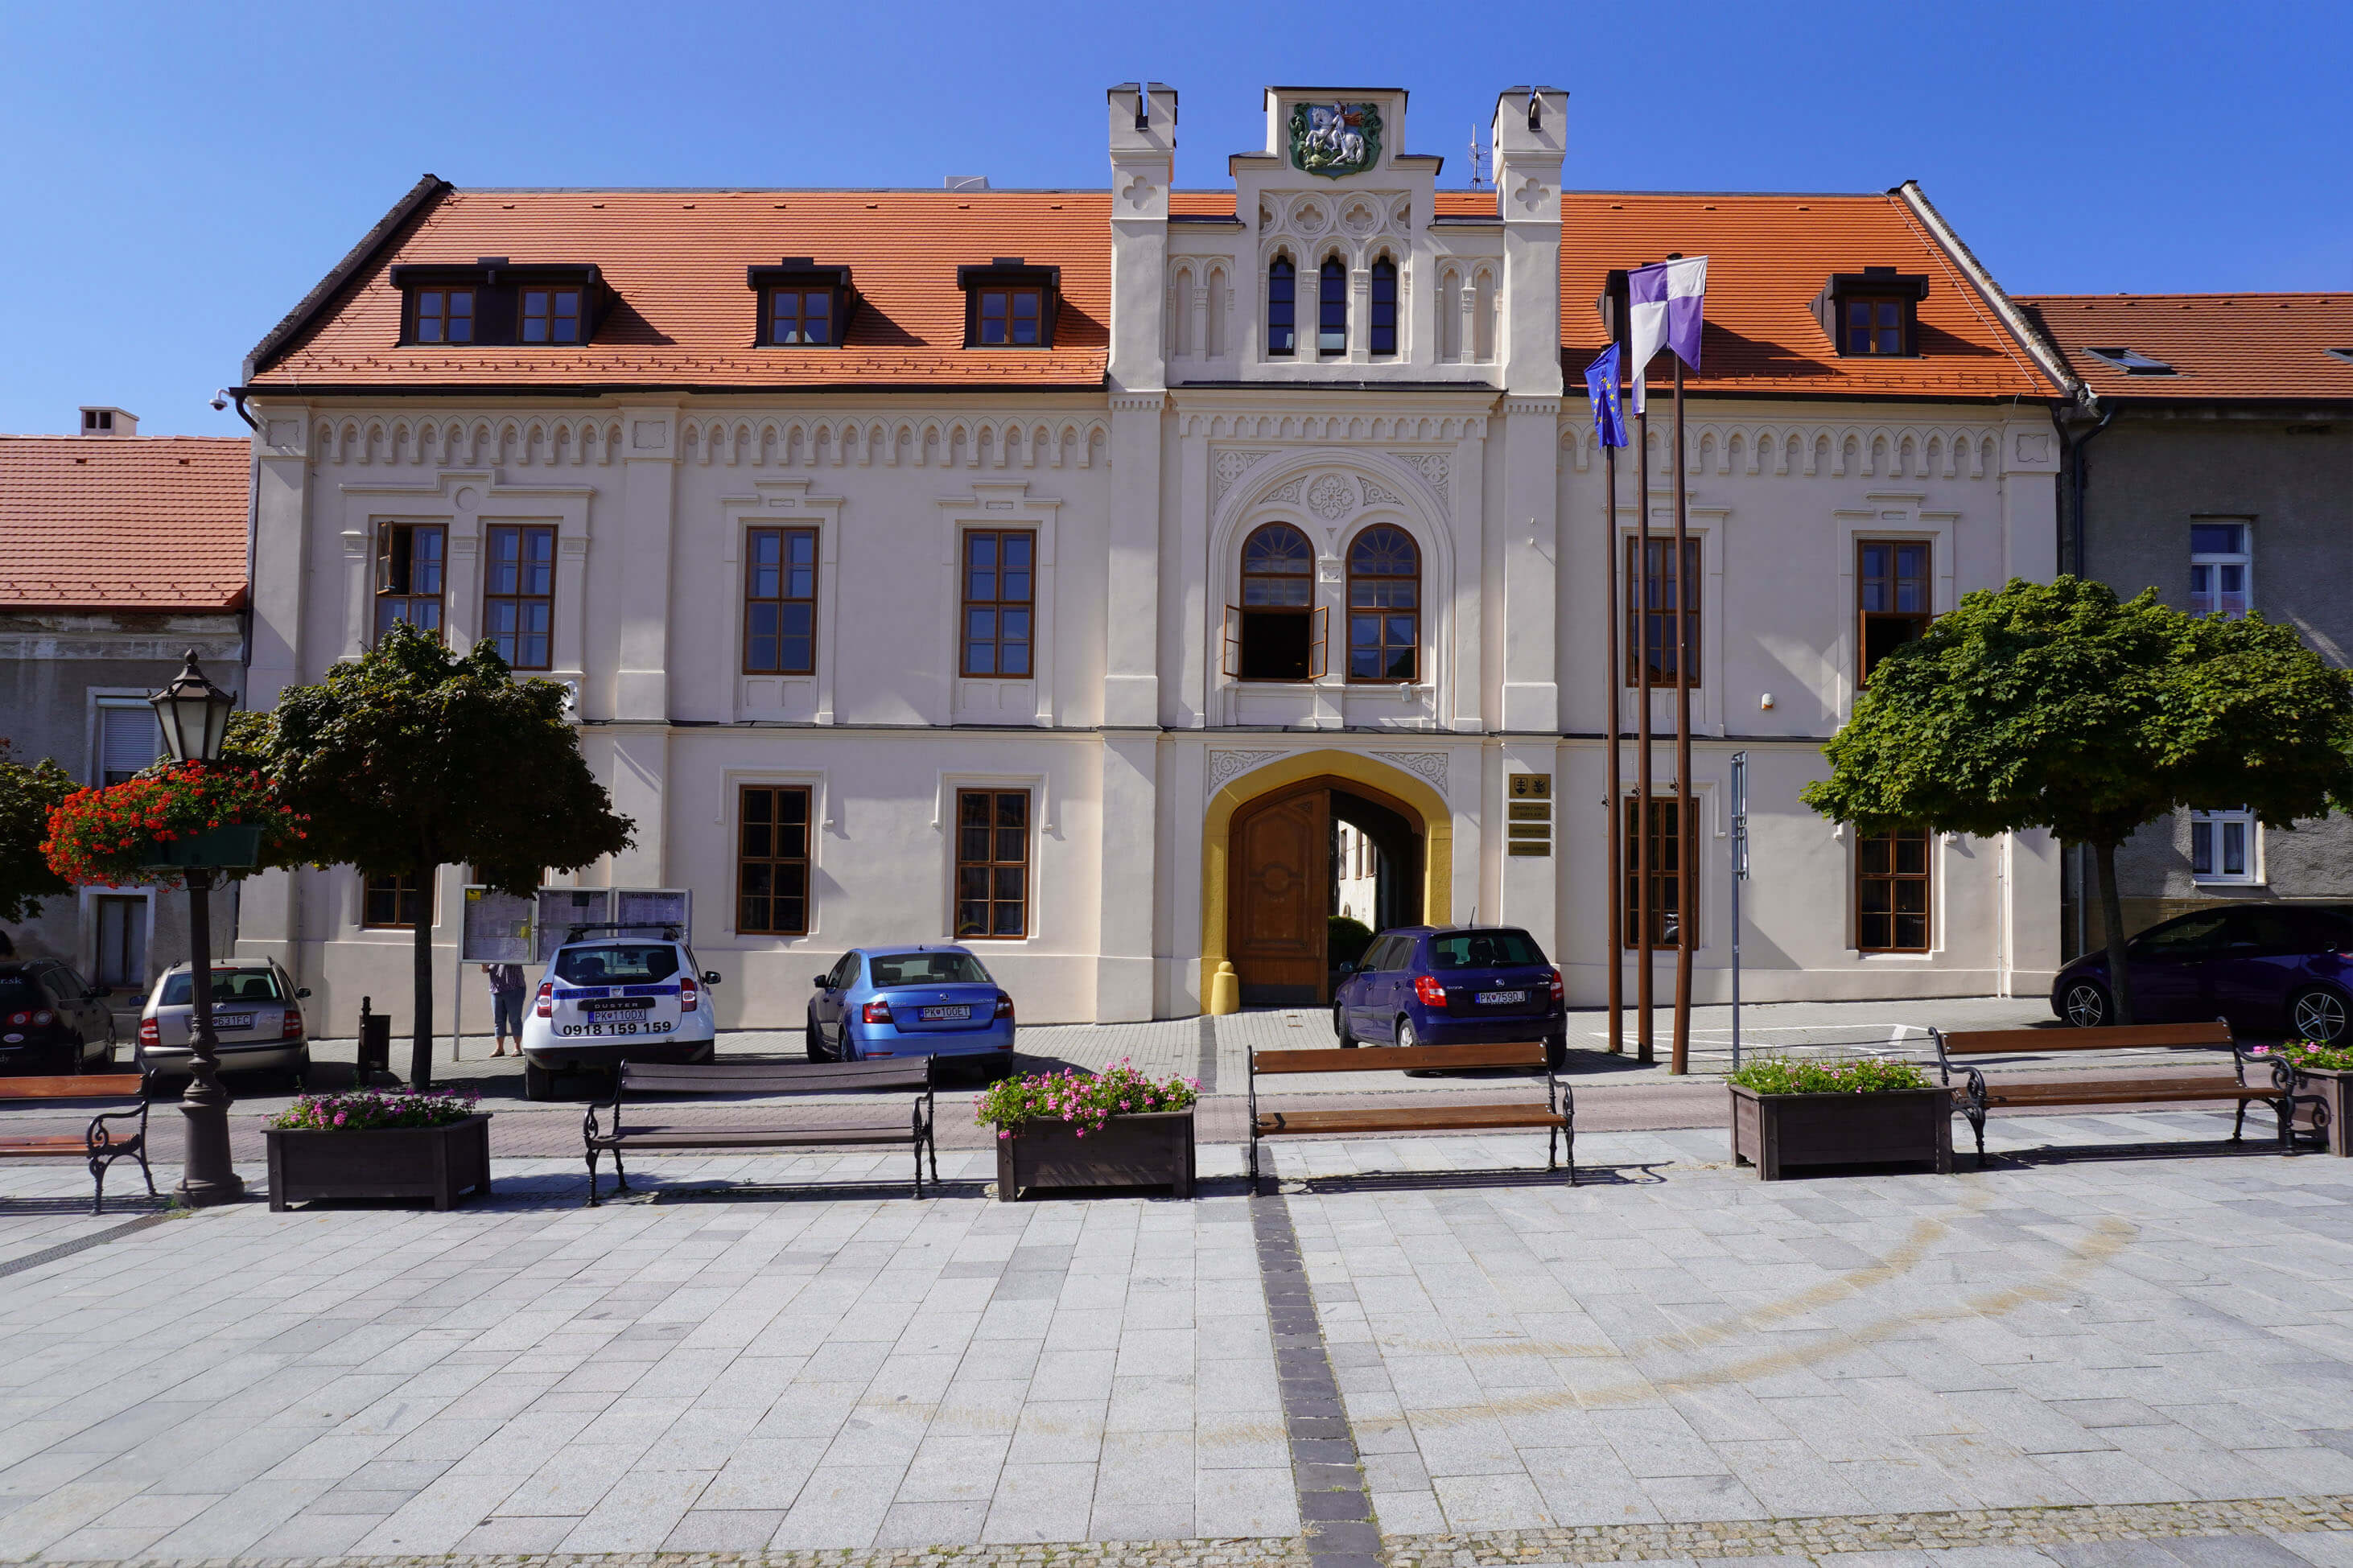 Reconstruction of the town hall facade